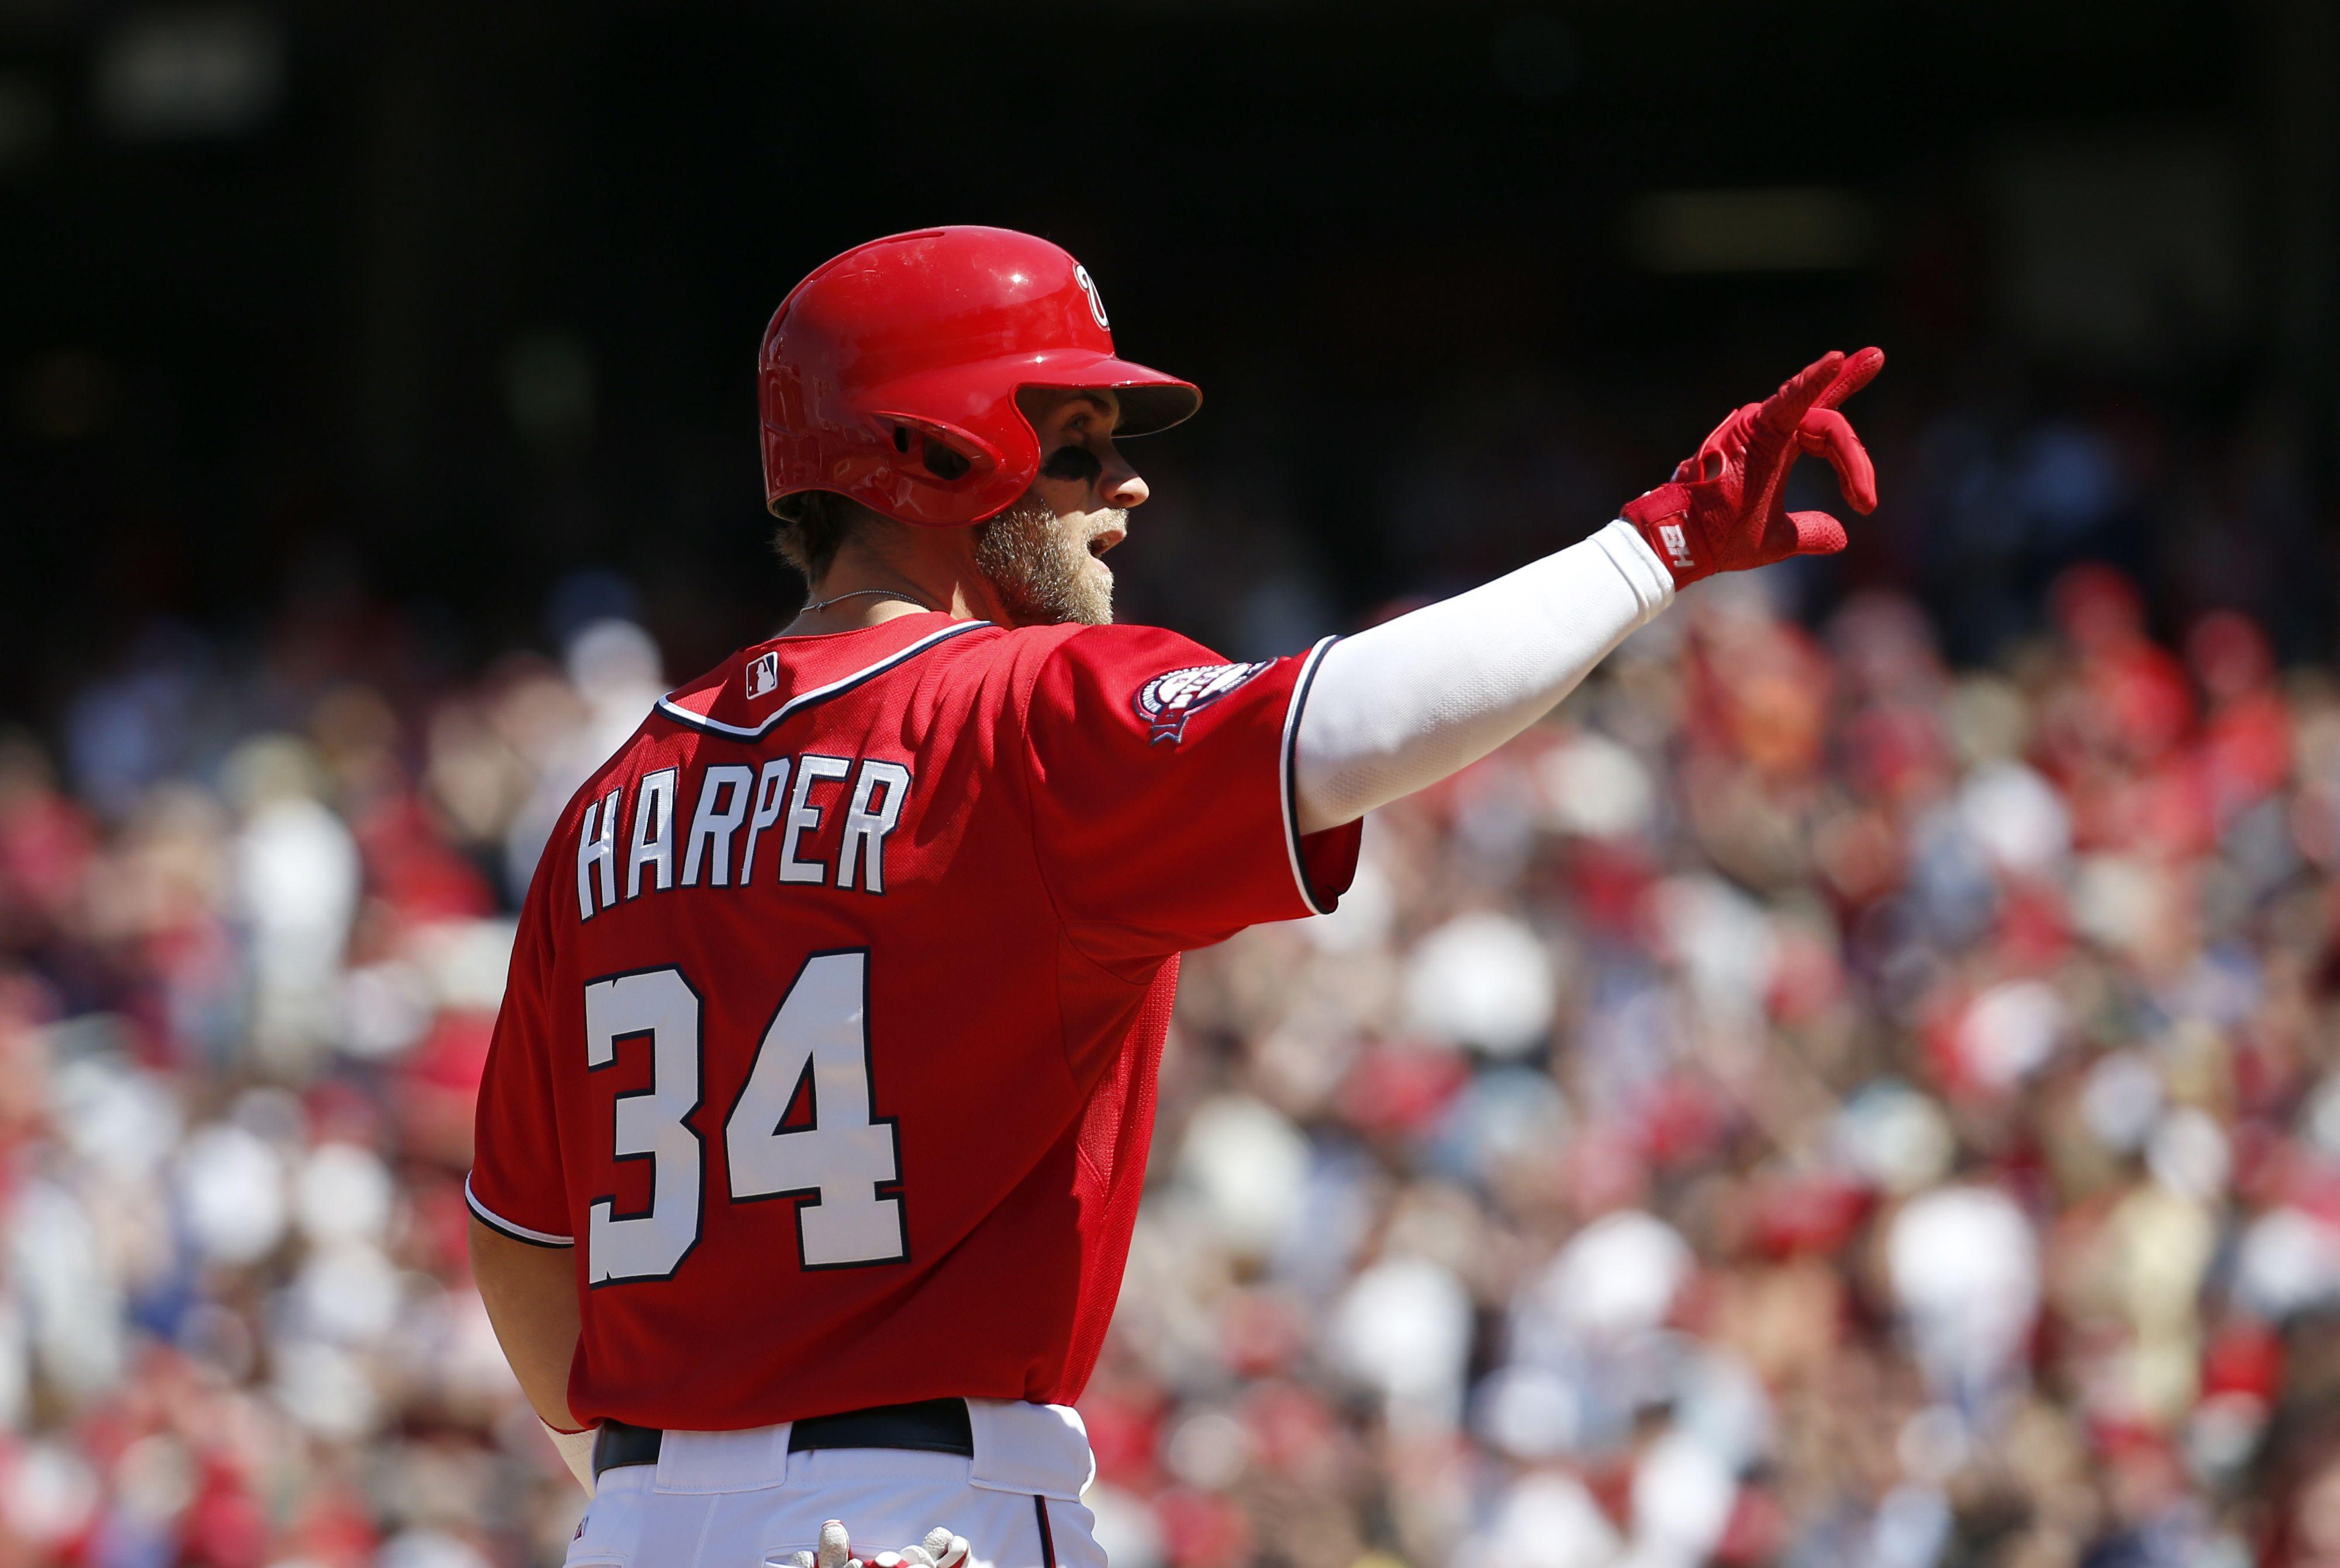 Bryce Harper's frequent walks indicative of comfort at the plate